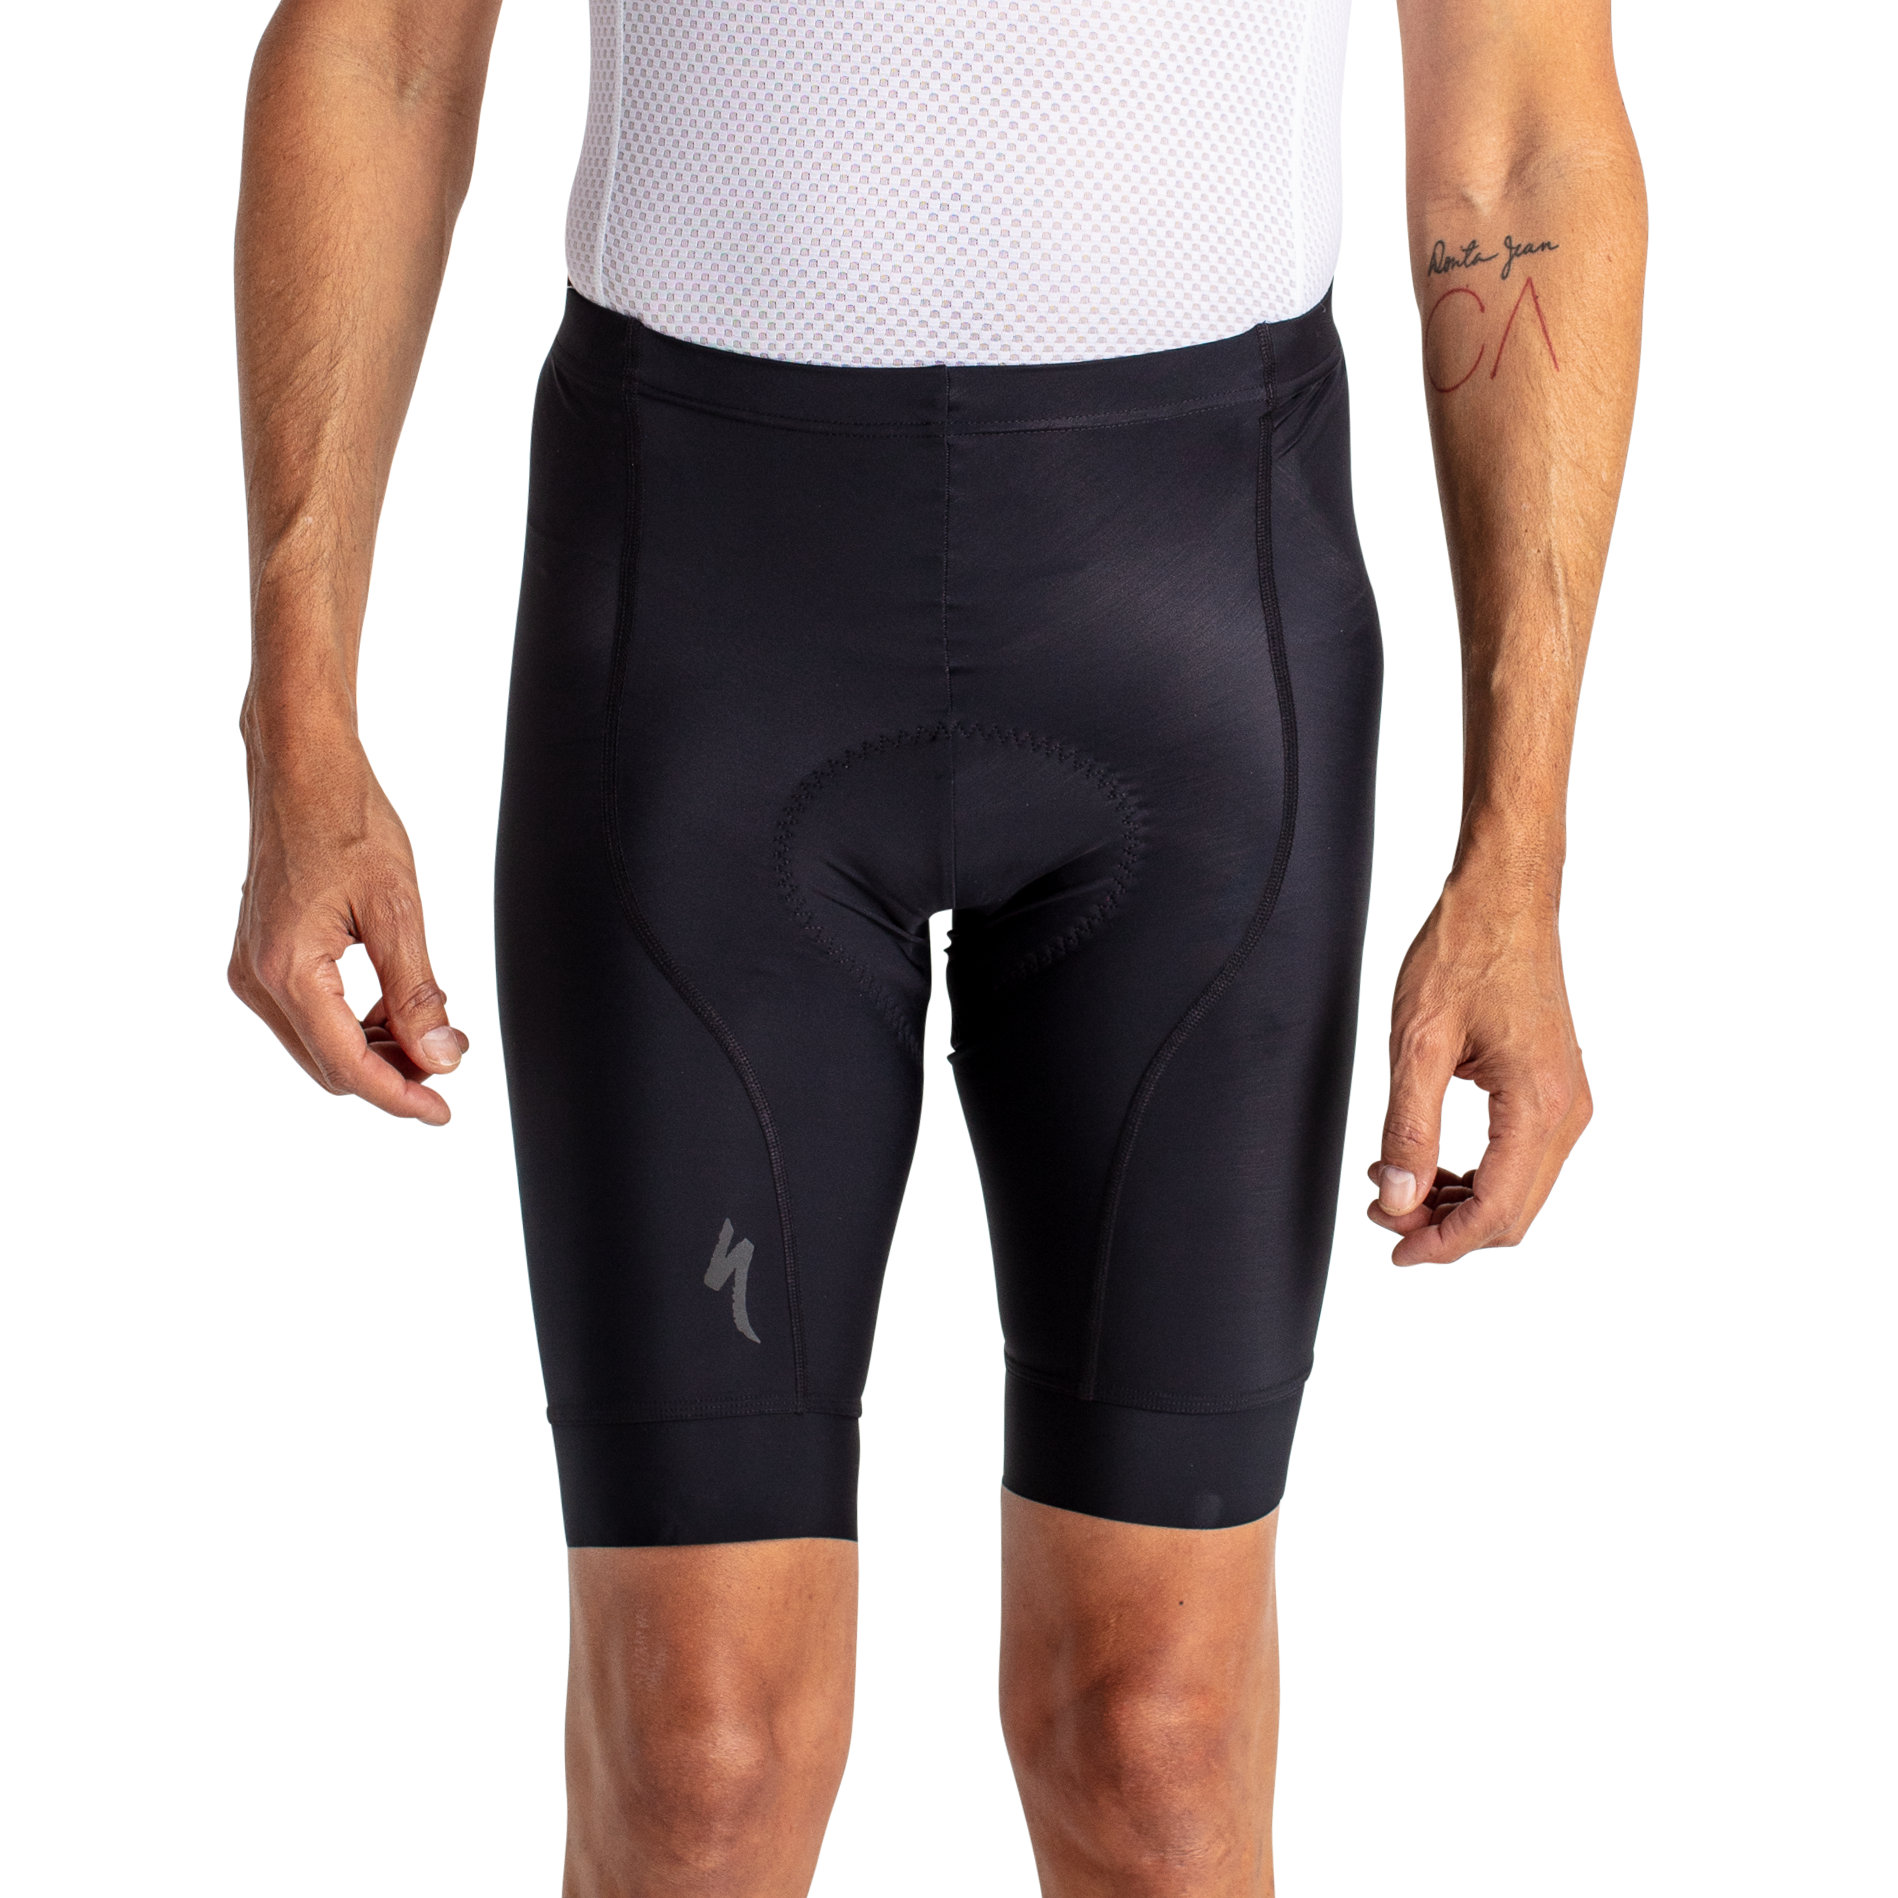 specialized rbx shorts